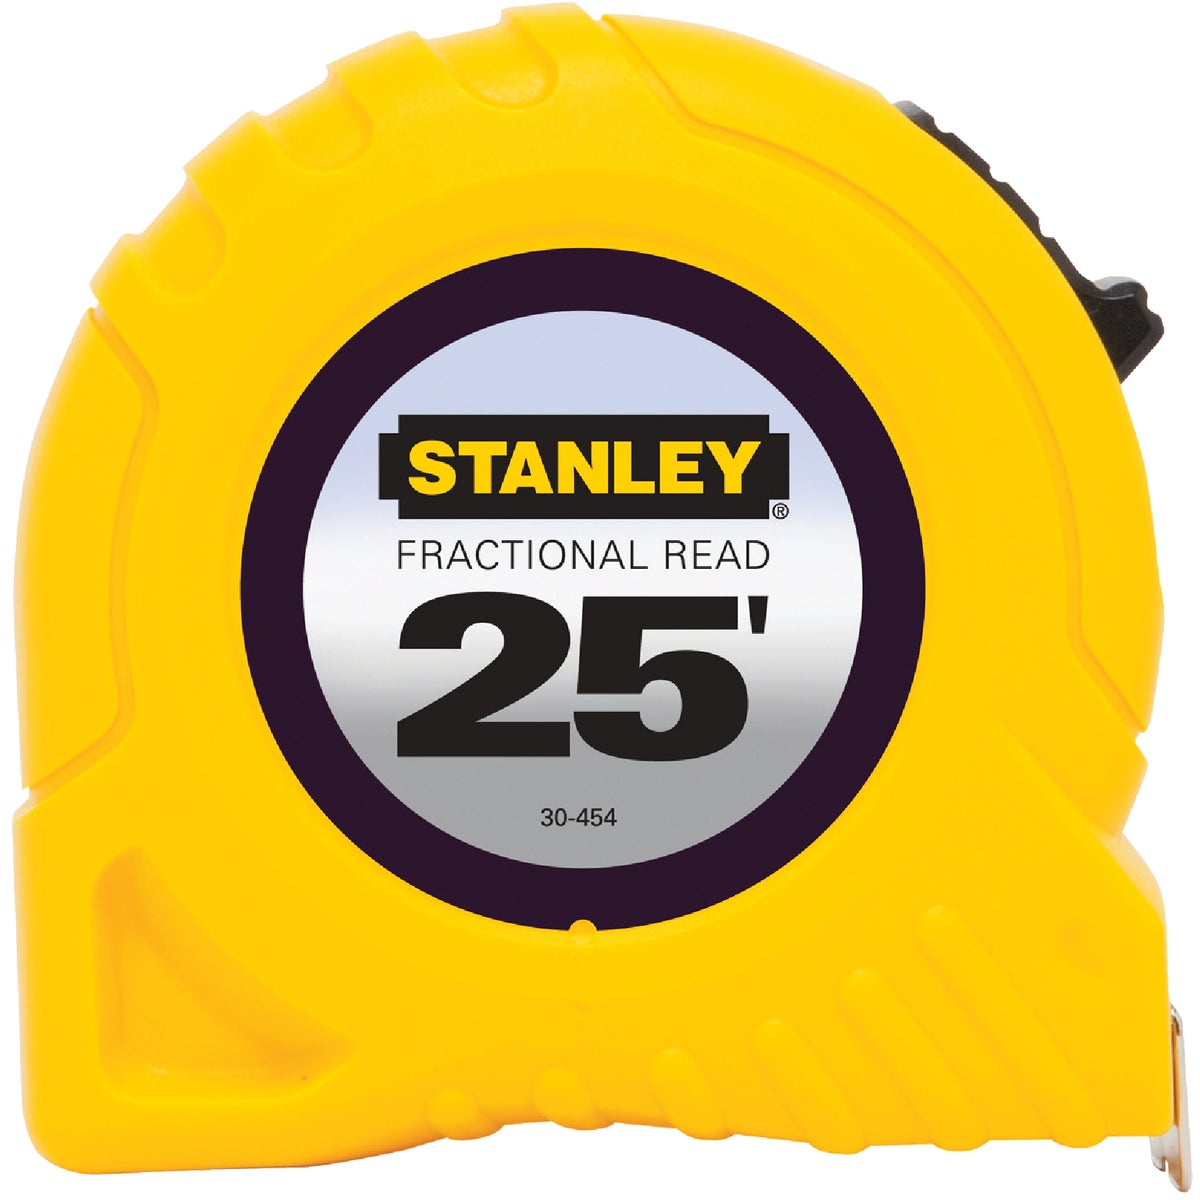 Item 320315, Fractional read blade graphics for quick and easy measurements.